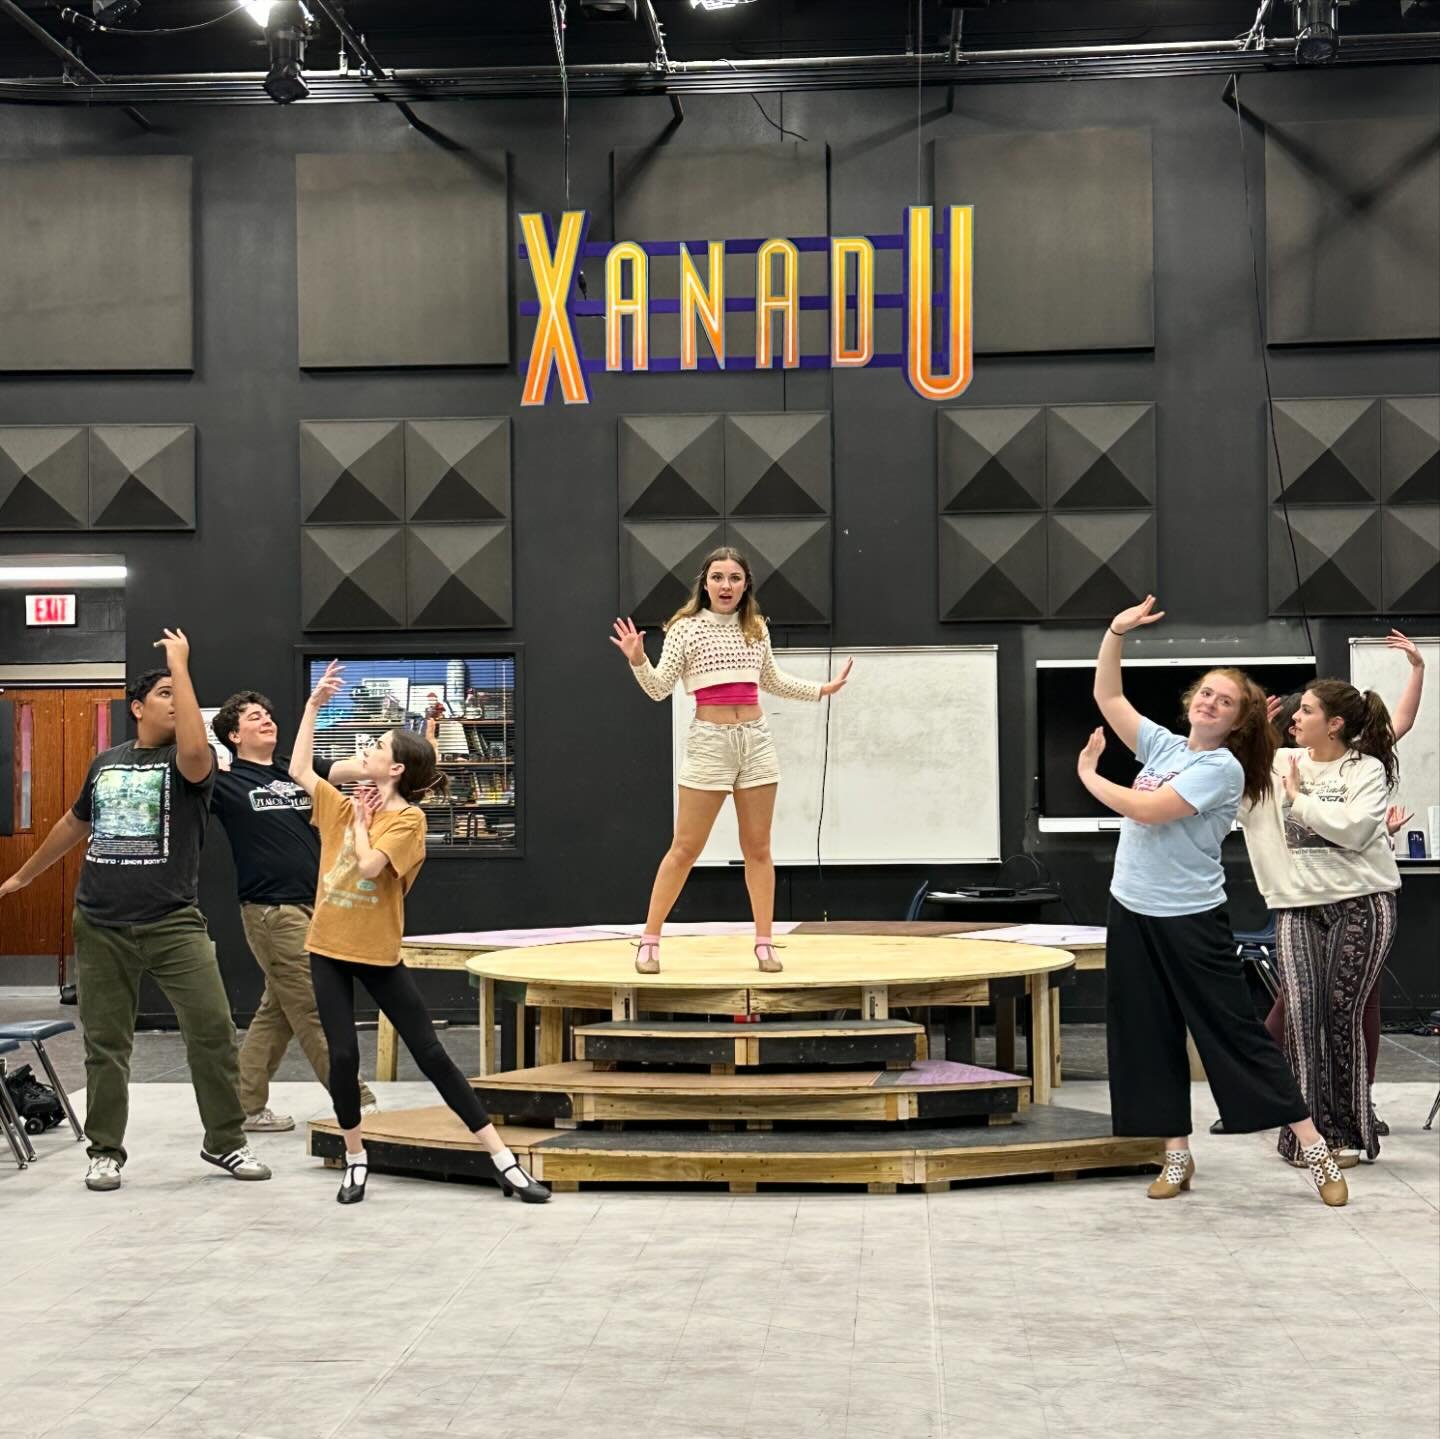 Xanadu opens in a week! Have you purchased your tickets yet? Don&rsquo;t miss out on this hilarious Greek inspired musical disco! Tickets available at www.dphstheatre.com